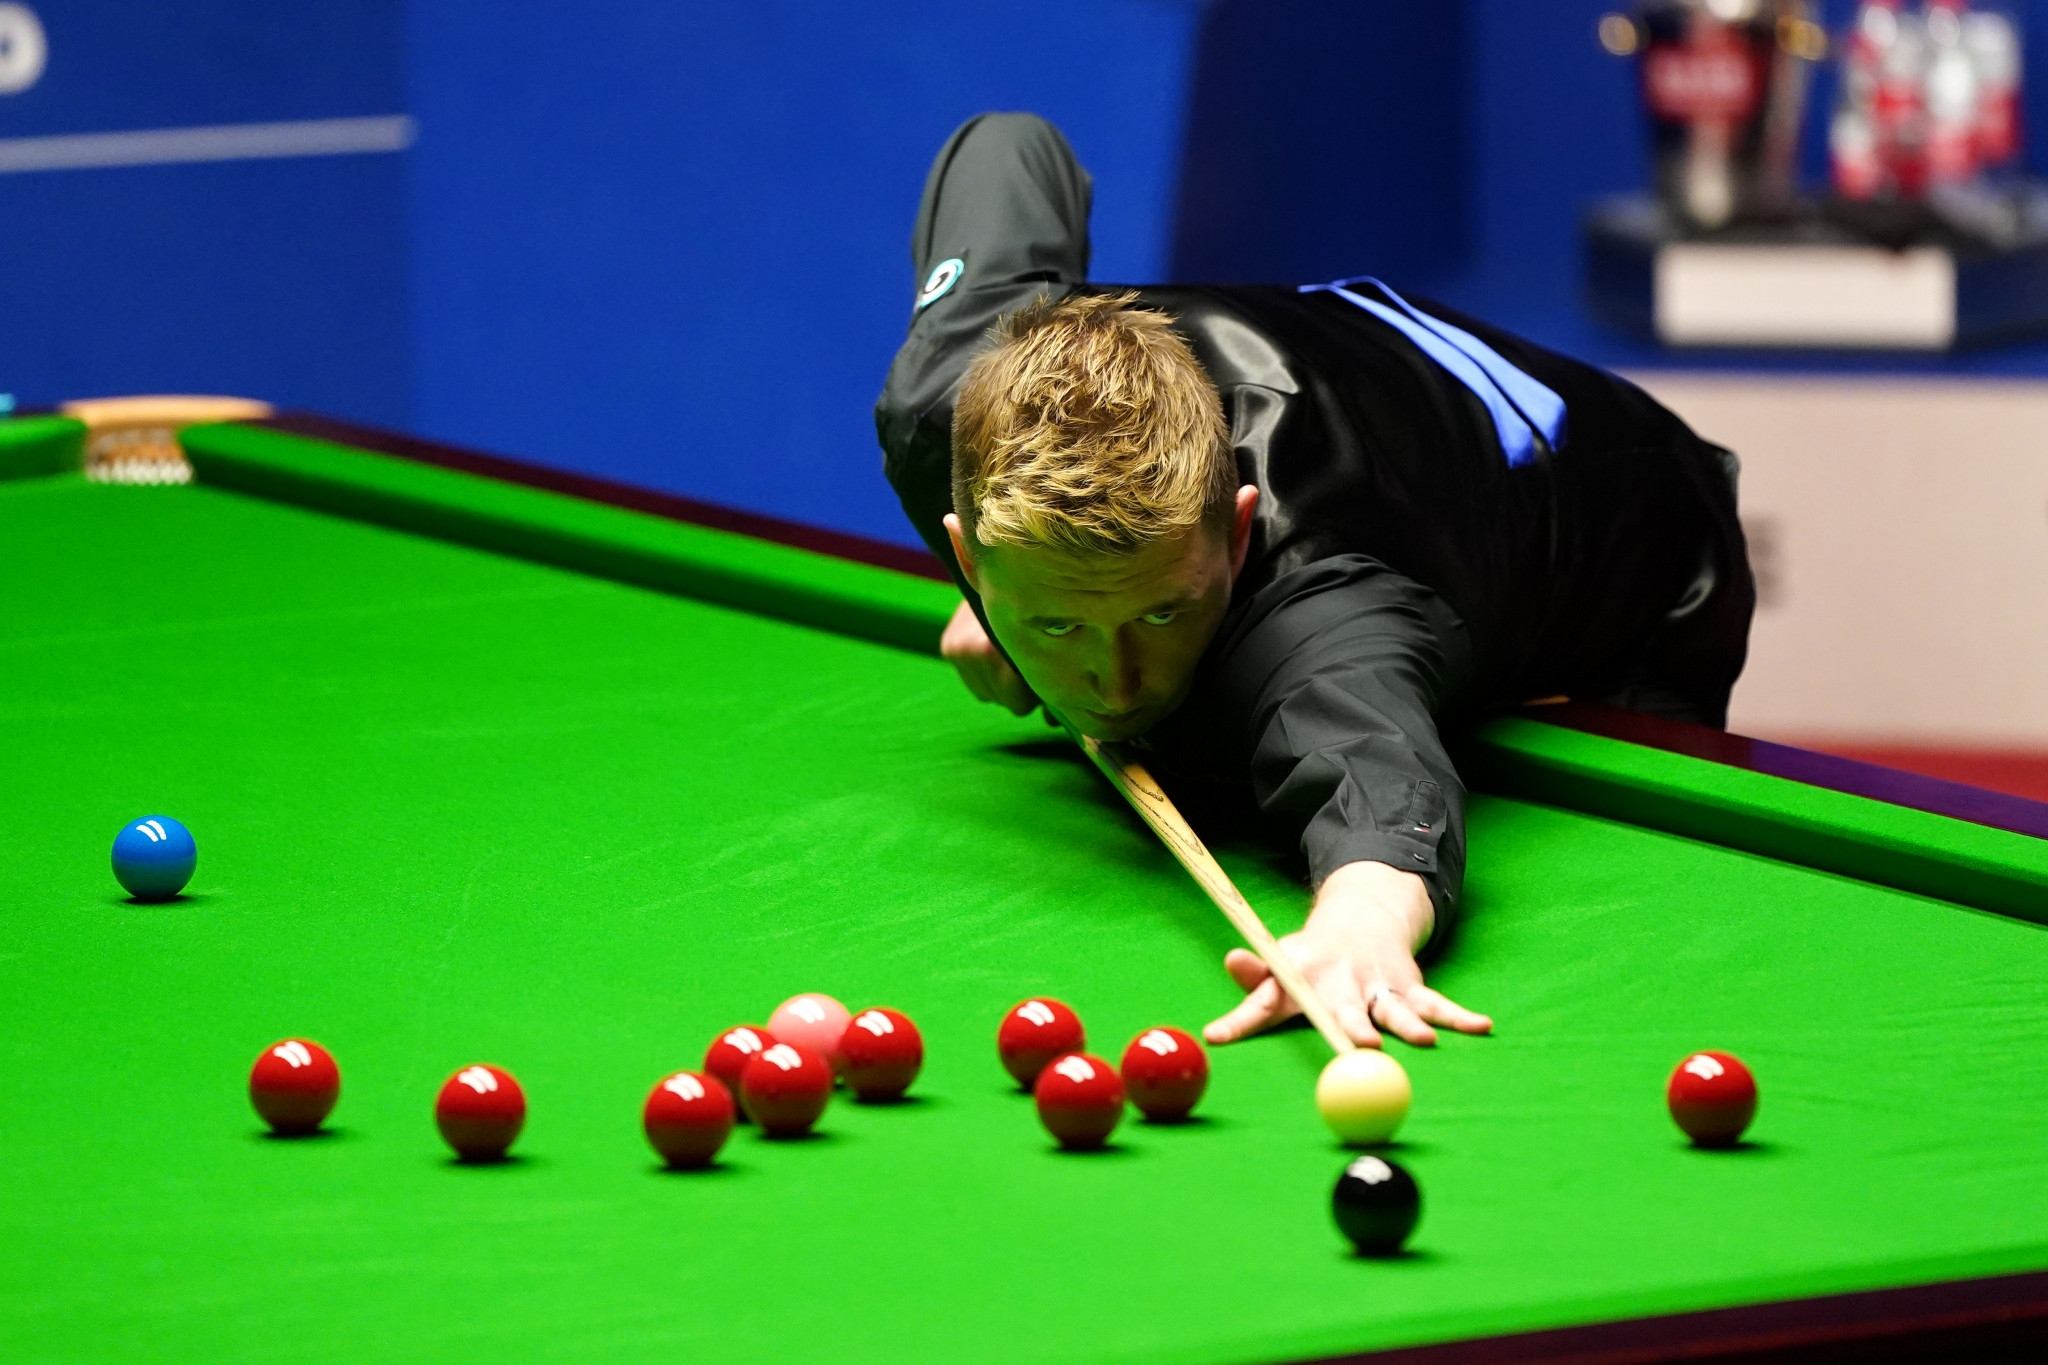 easy to handle Satisfy frozen Wilson opens up four frame lead in World Snooker Championship semi-final